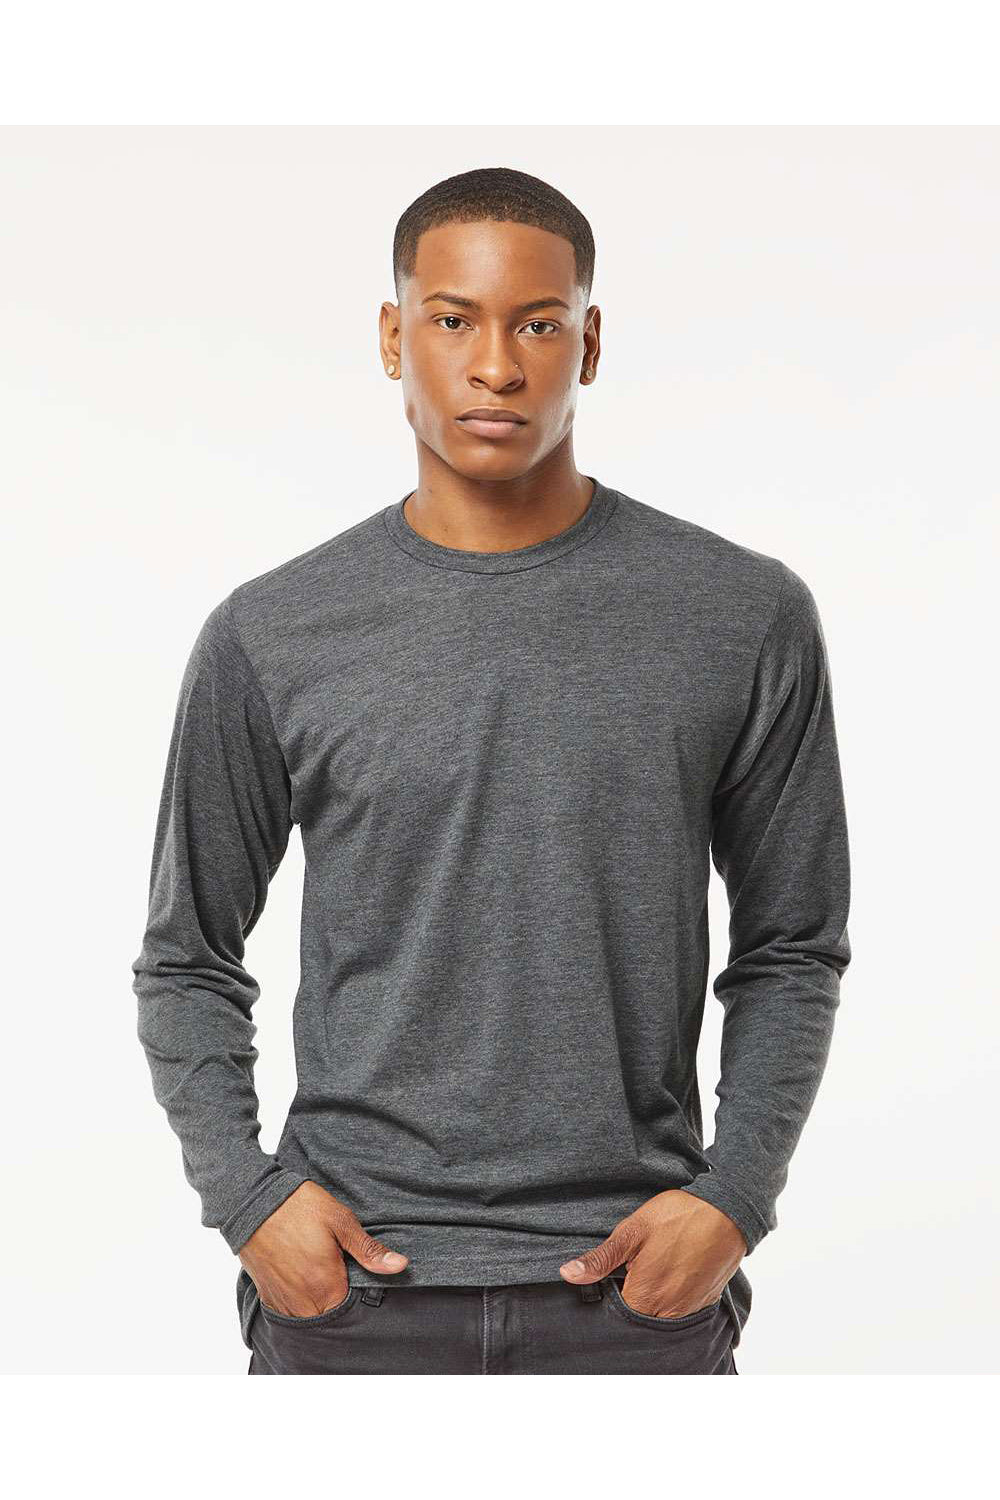 Tultex 242 Mens Poly-Rich Long Sleeve Crewneck T-Shirt Heather Charcoal Grey Model Front